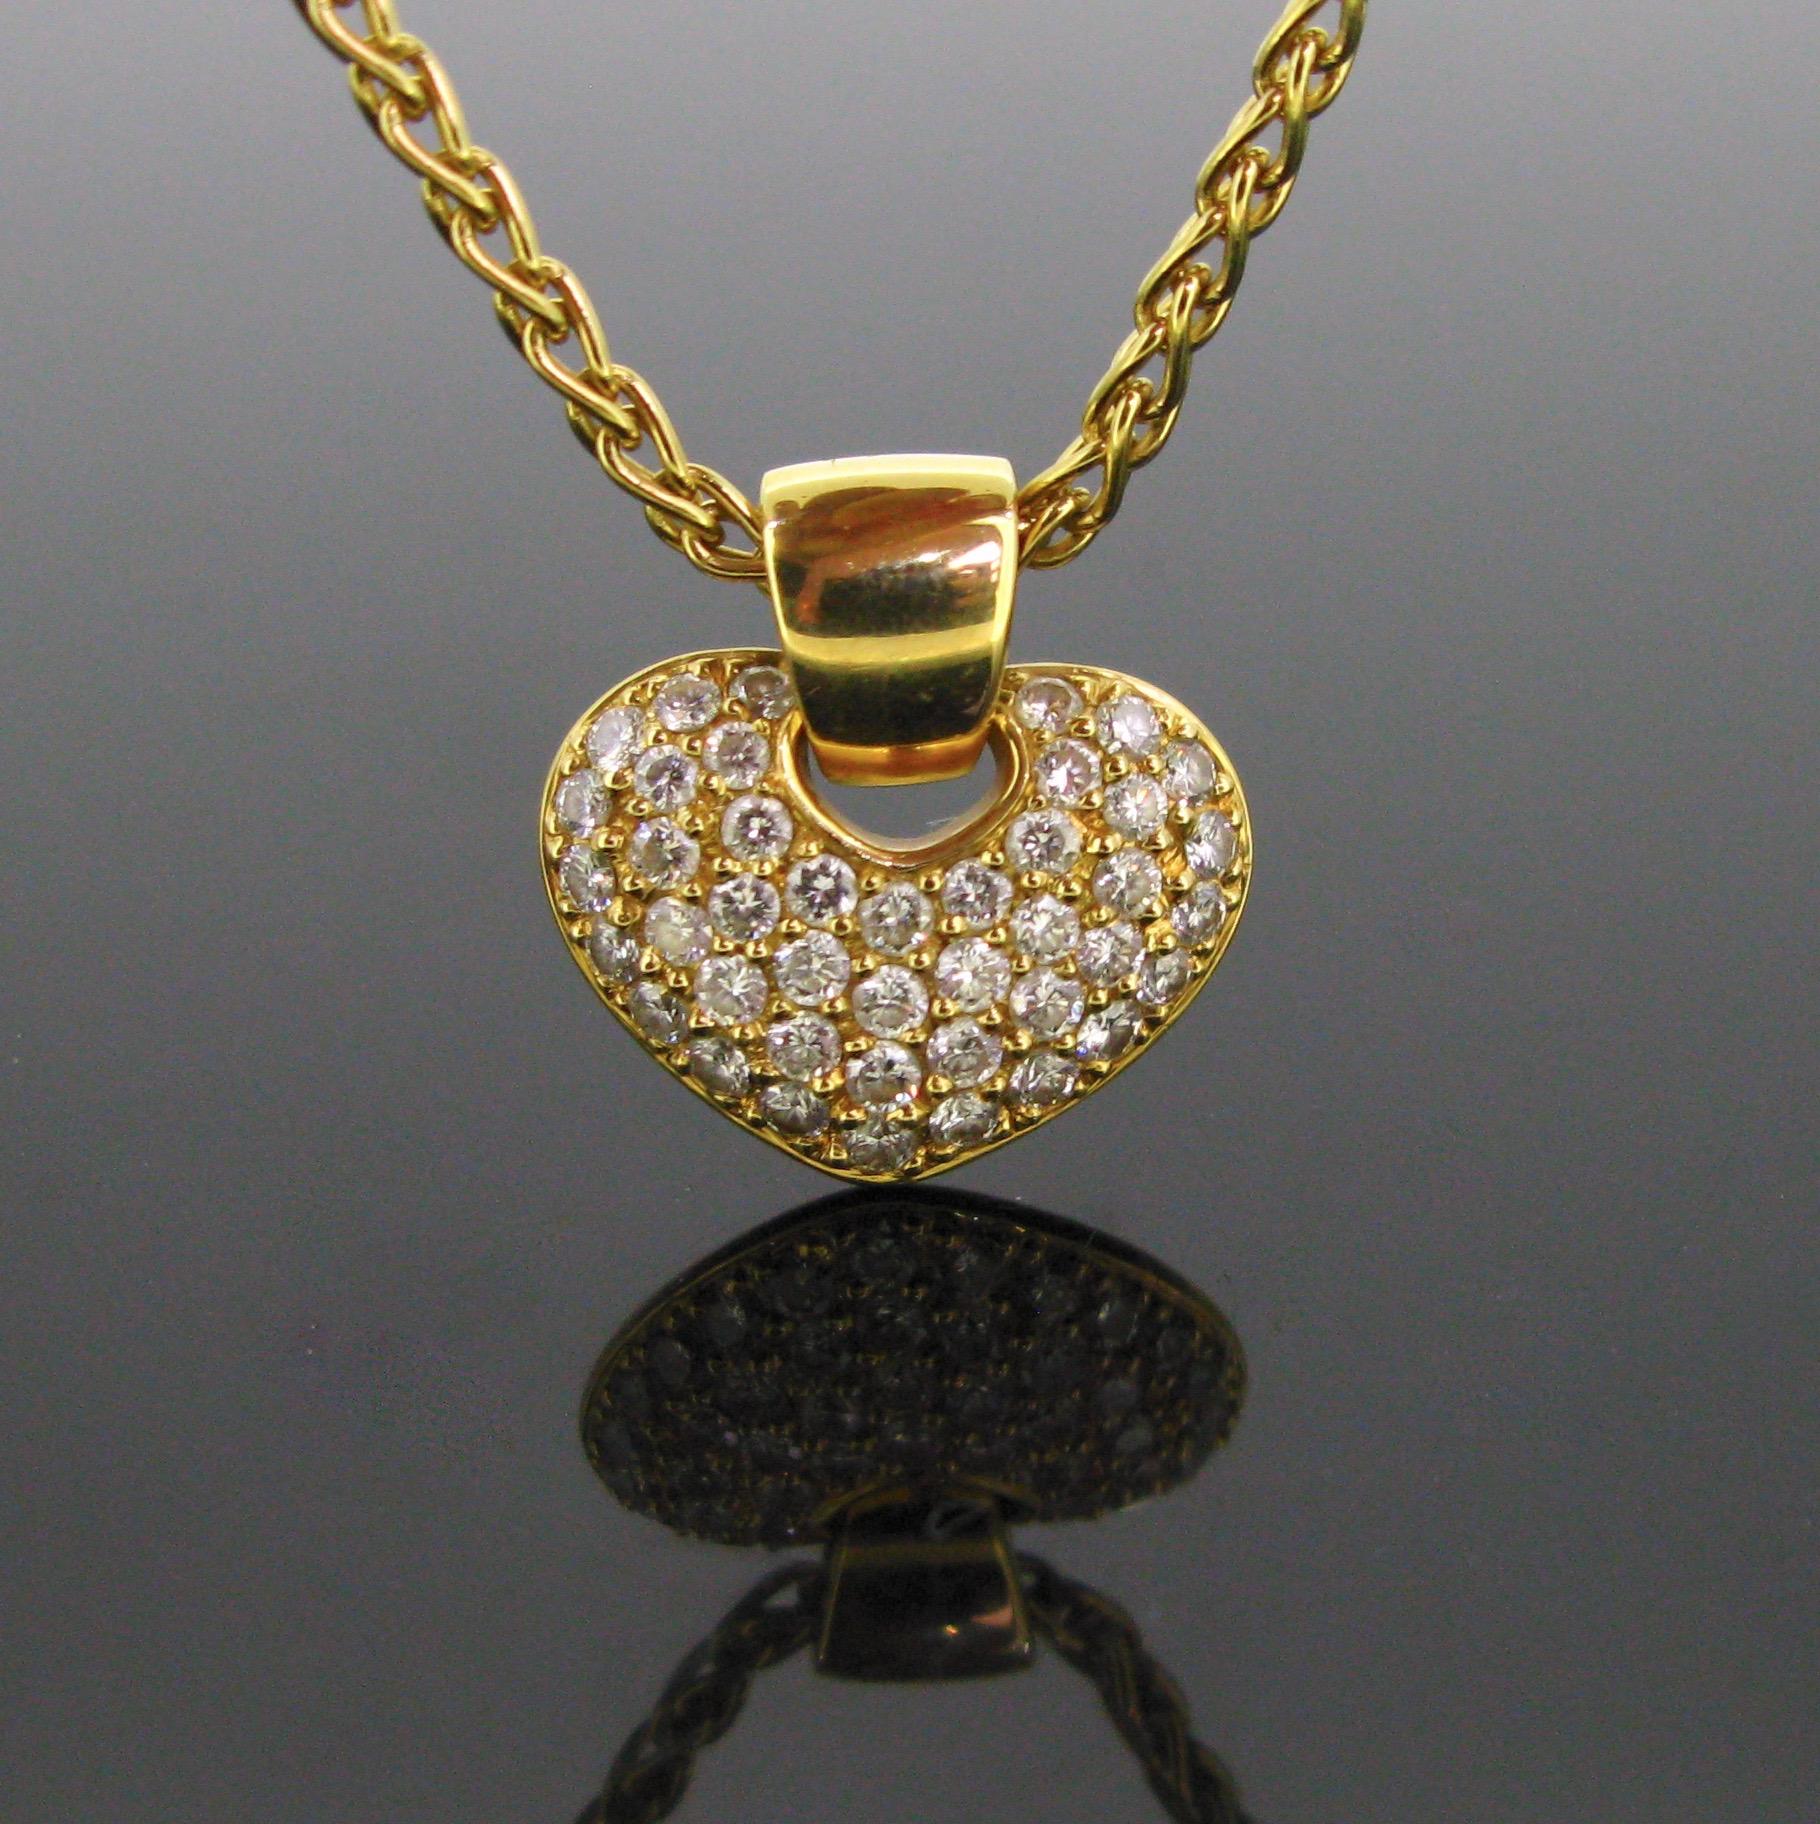 This beautiful heart shape pendant is paved with 42 brilliant cut diamonds. It comes with a 18kt yellow gold chain. The pendant and the chain have been controlled with the French eagle’s head and the maker’s mark. It is the perfect present for your